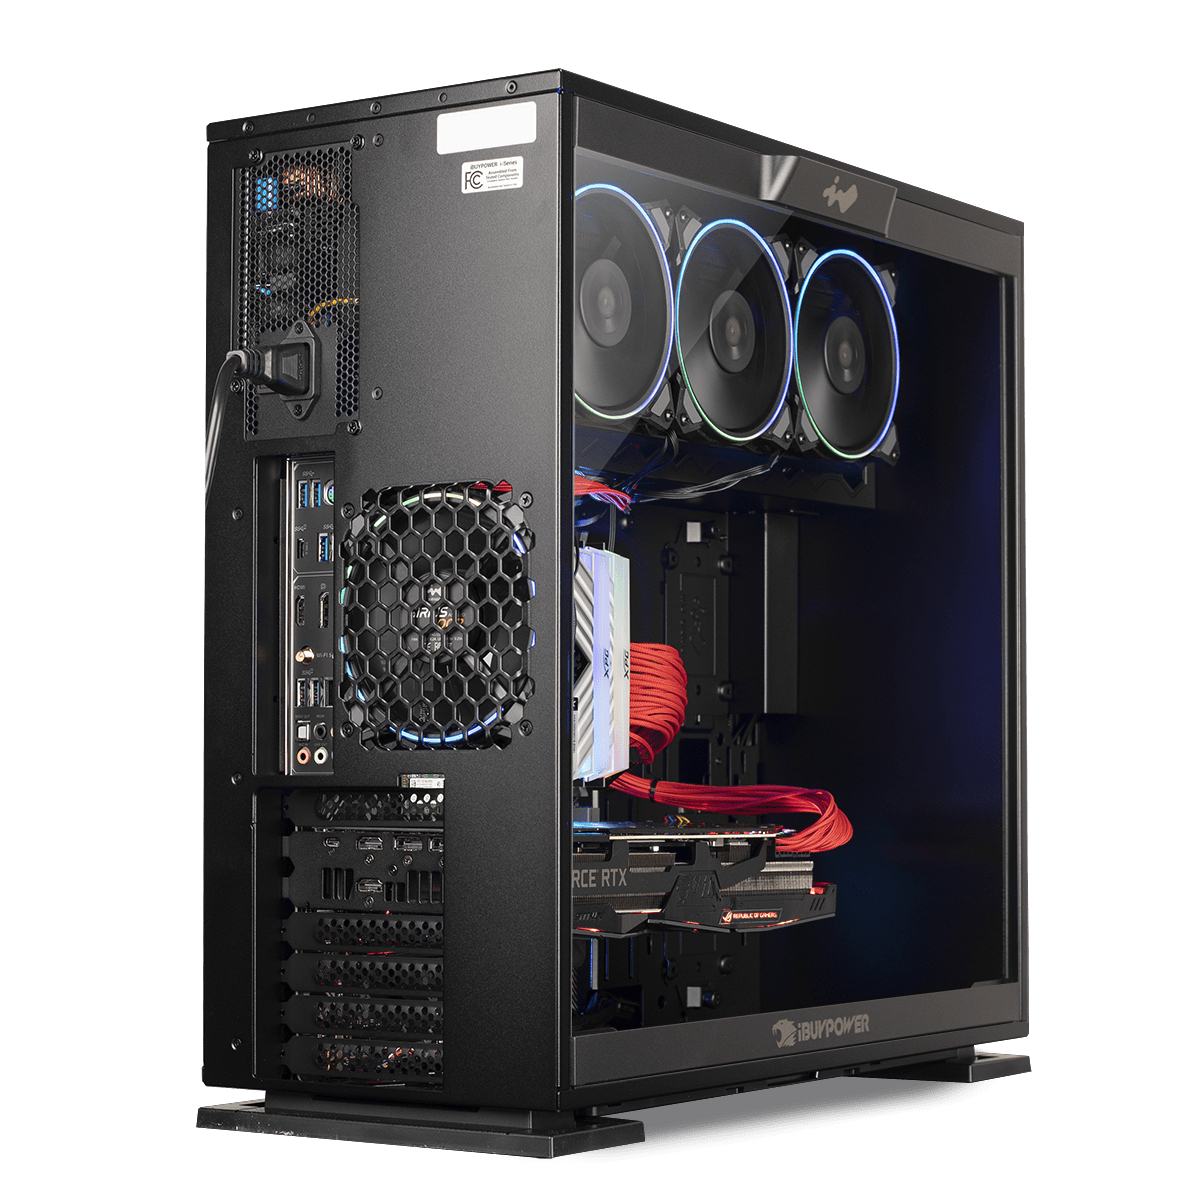 AMD Ryzen Streaming PC Daily Deal: iBUYPOWER® Gaming PC